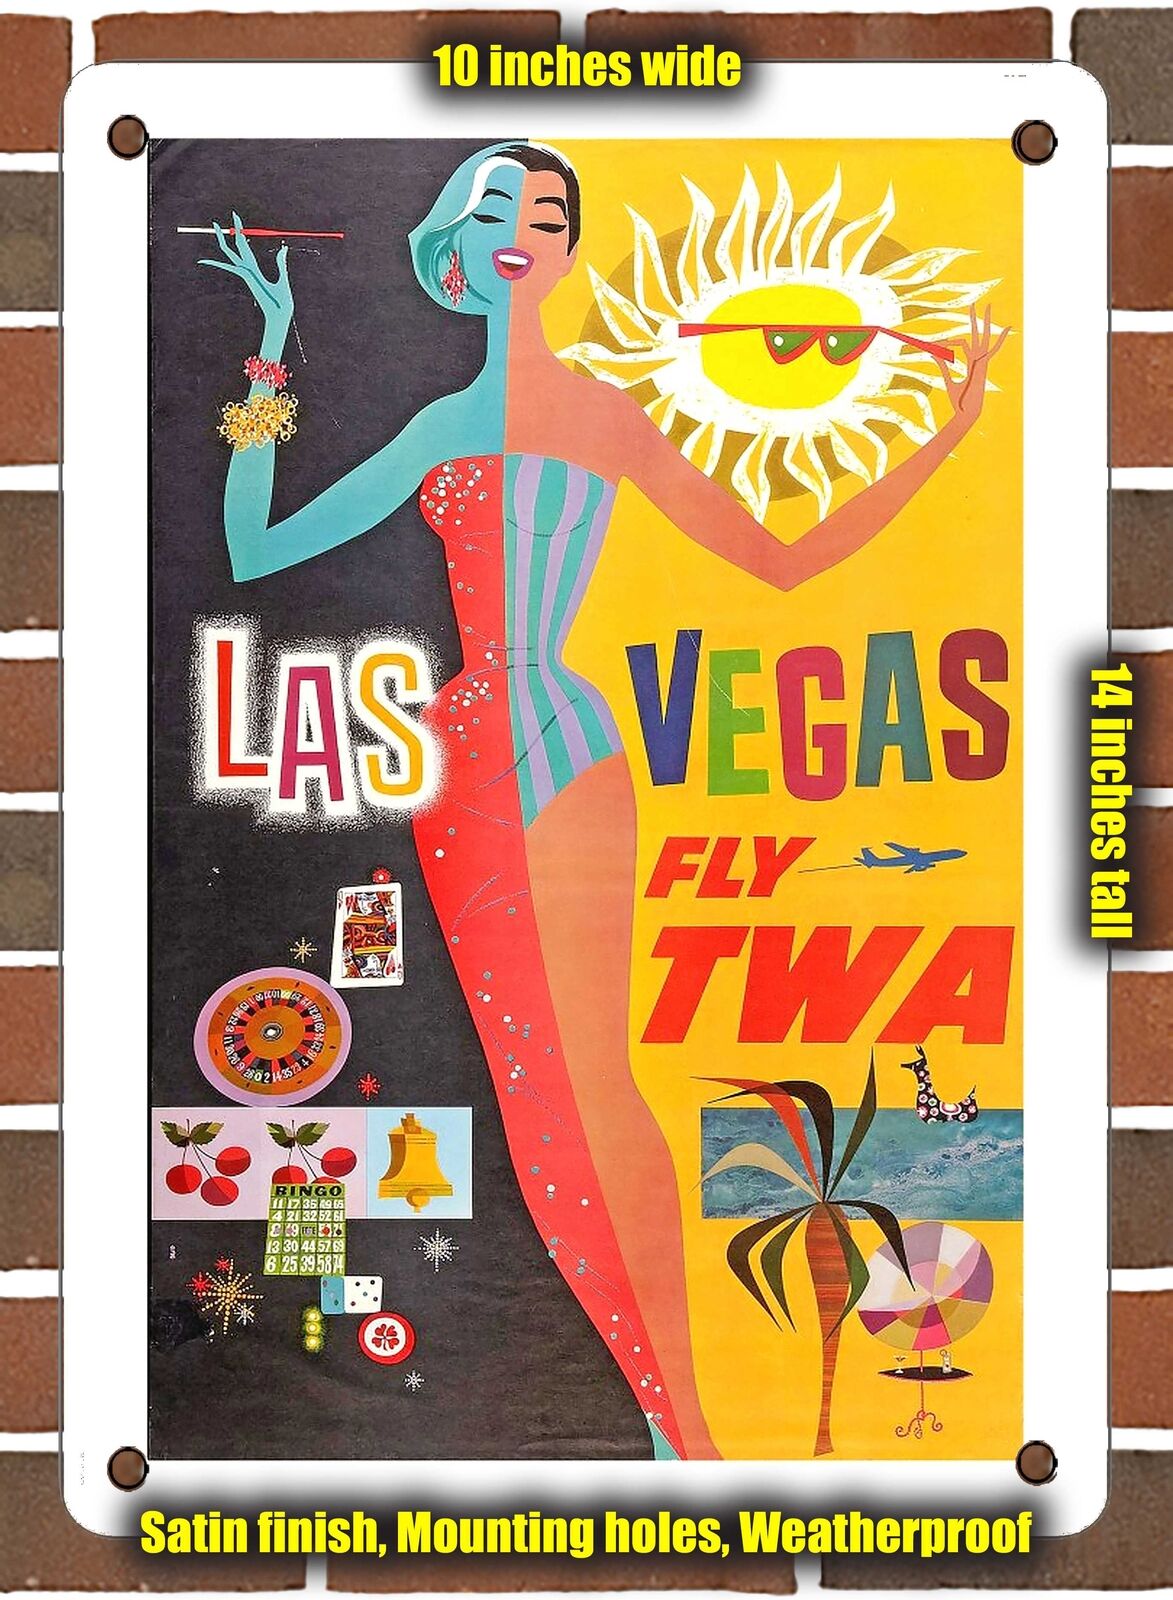 METAL SIGN - 1965 Las Vegas Fly World Airlines - 10x14 Inches